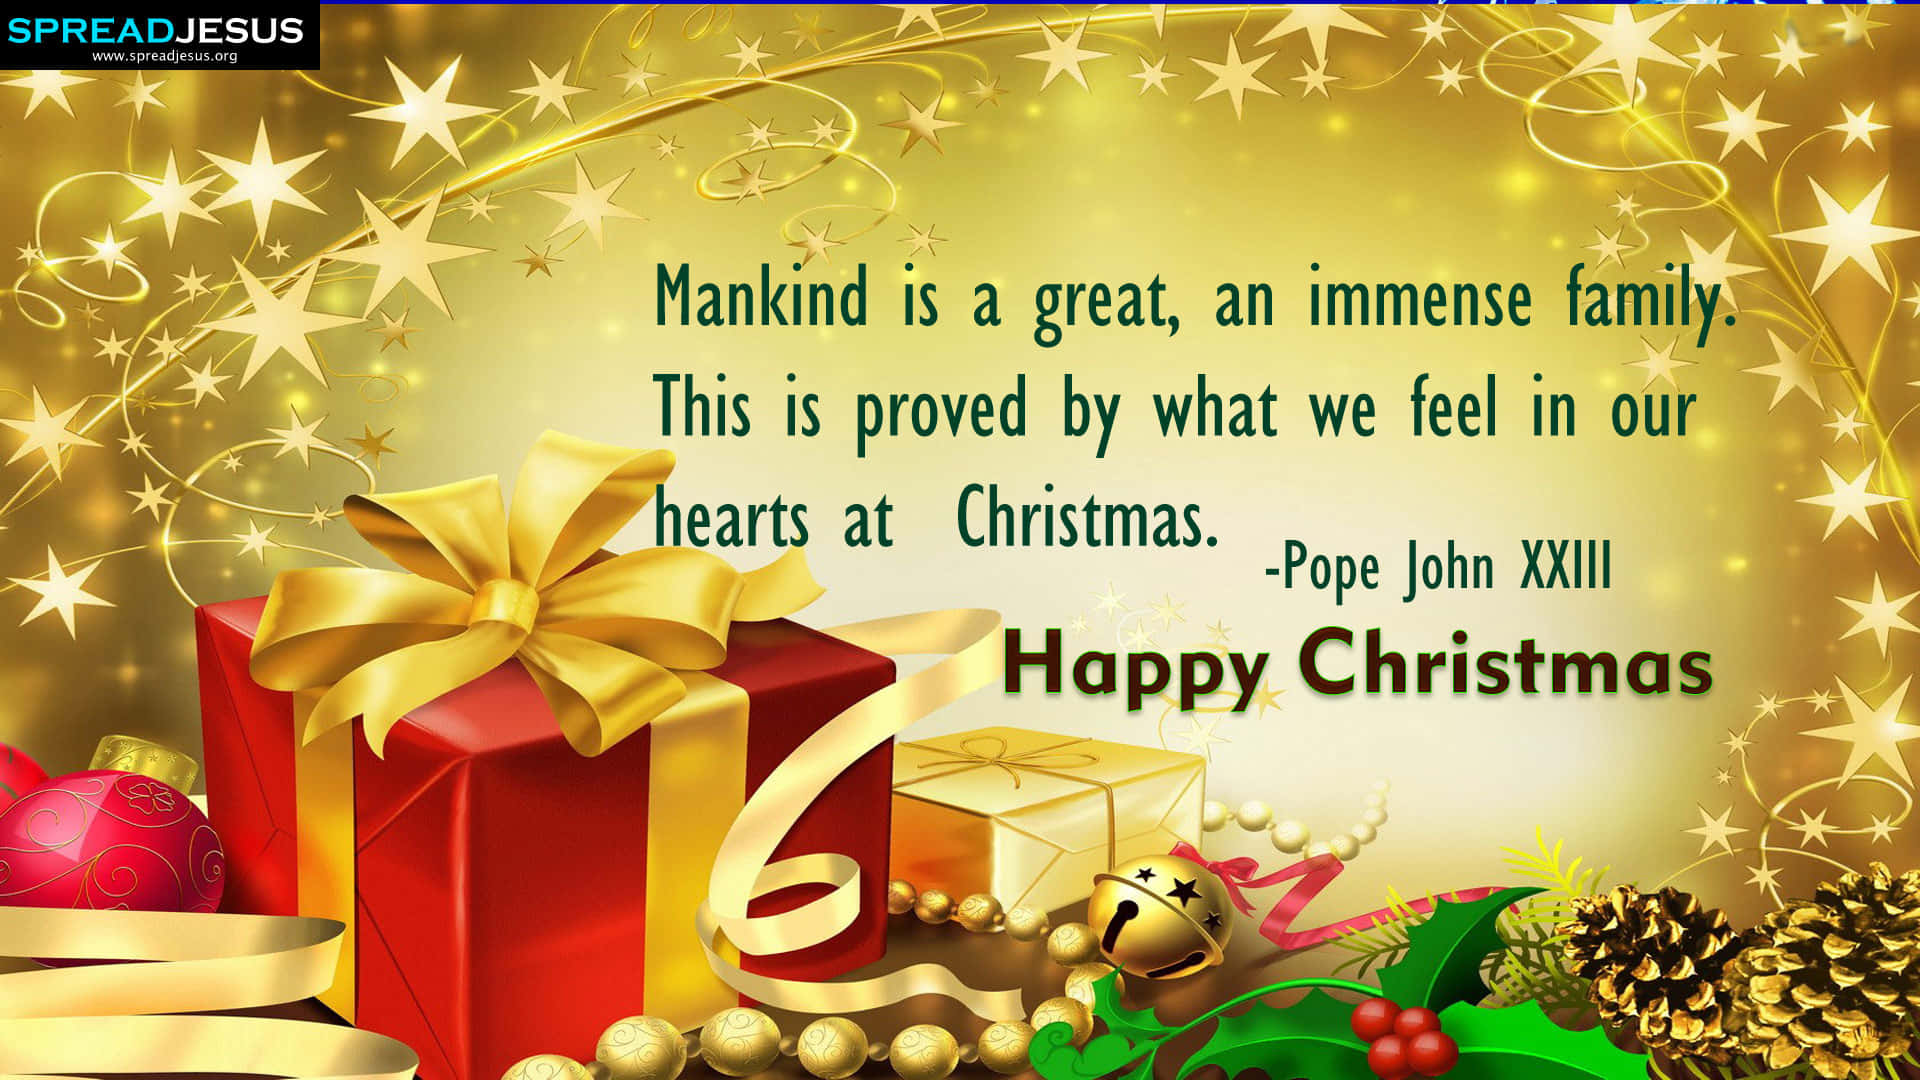 Christmas is a time of joyful sharing and giving. Wallpaper